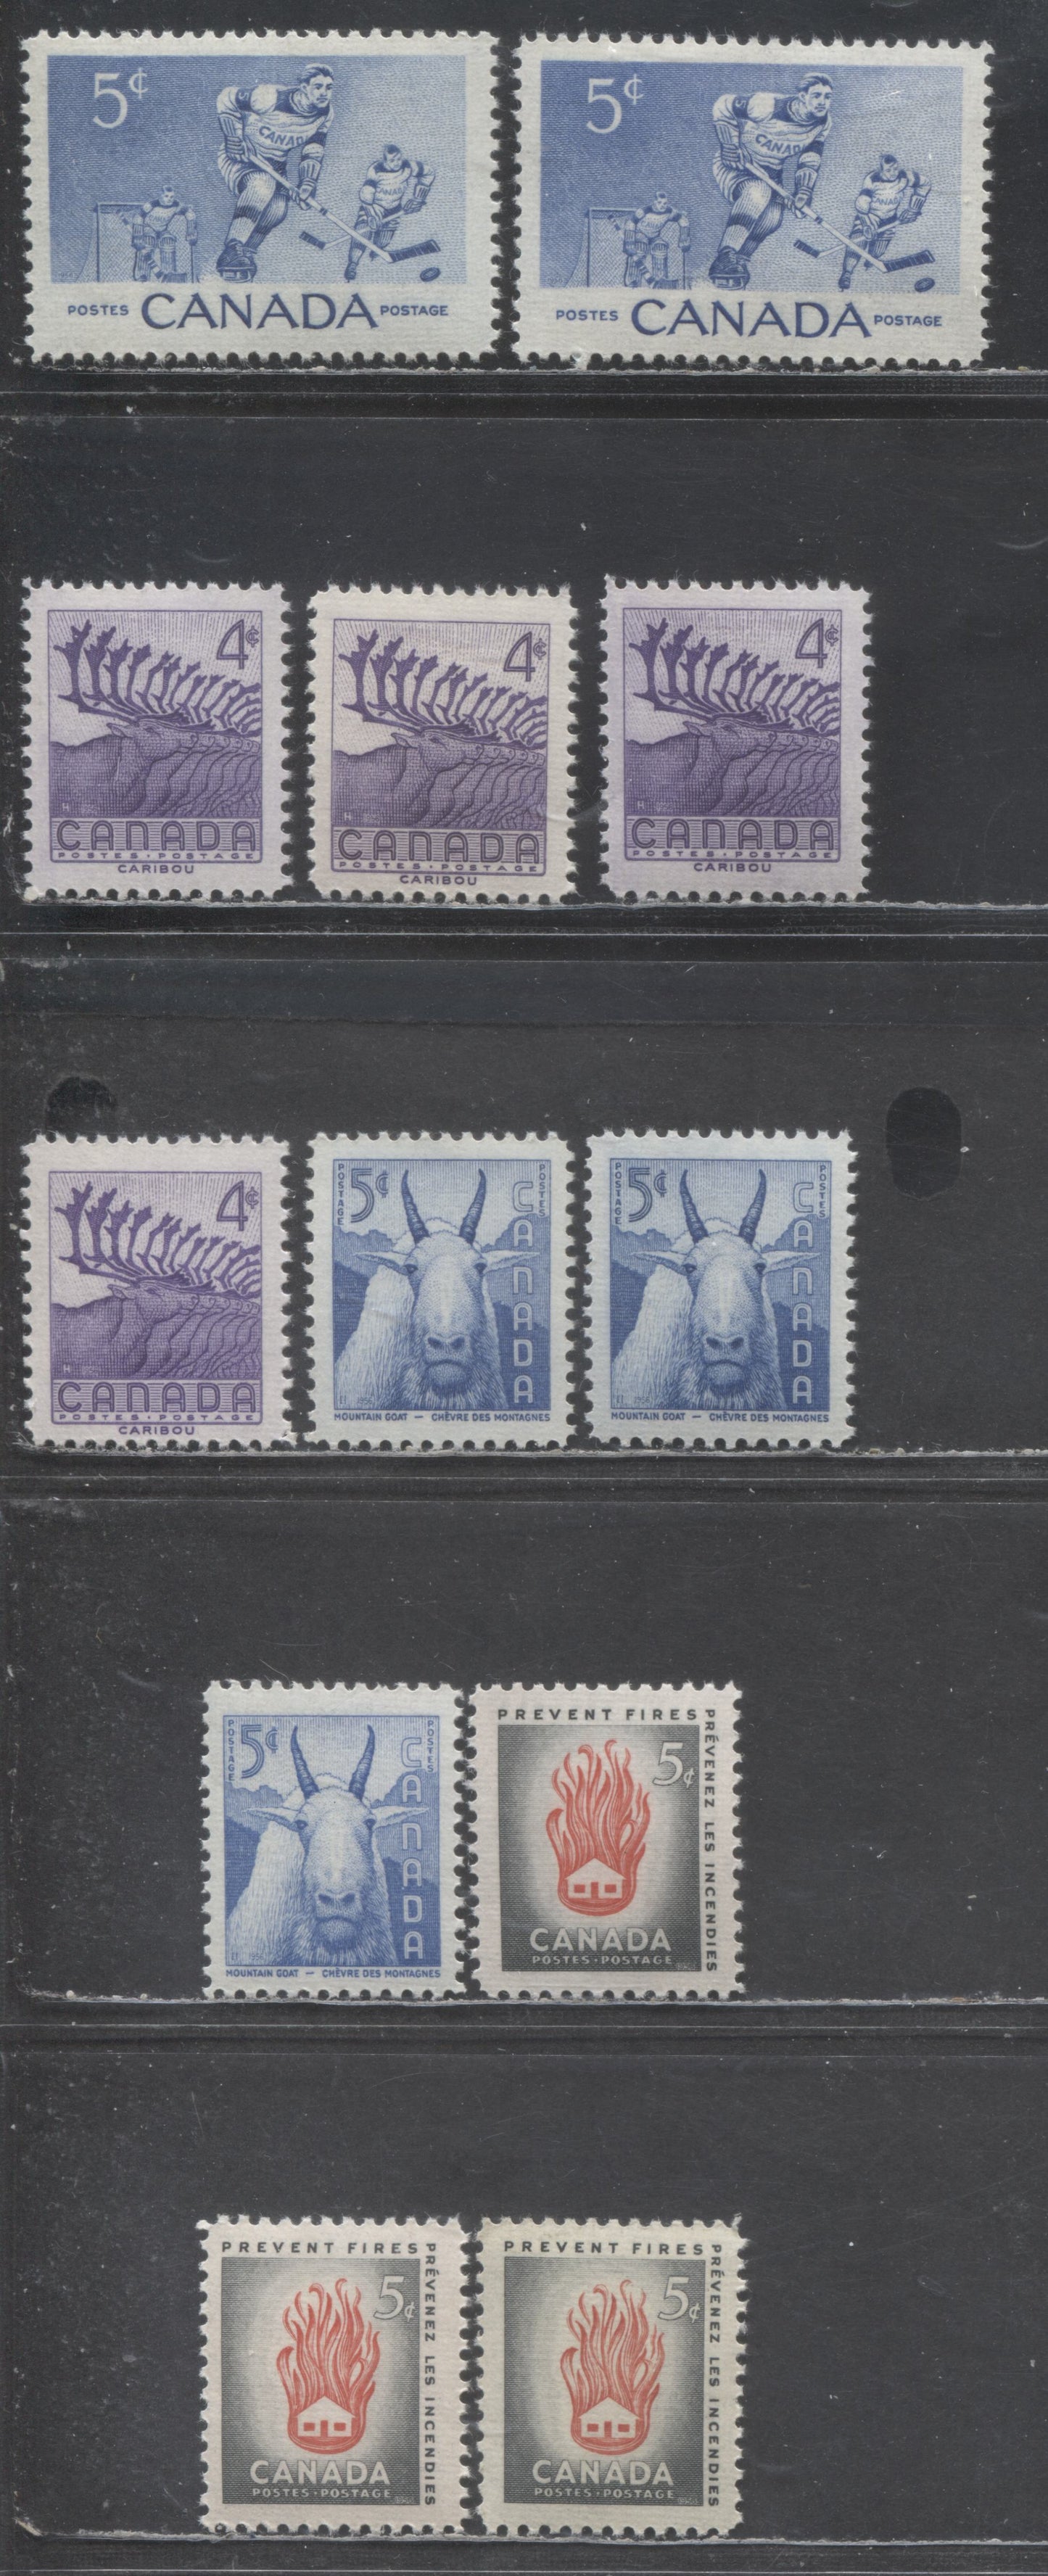 Canada #359-36, 364 4c-5c Violet, Ultramarine, Olive Grey & Vermilion Various Subjects, 1956 Hockey - Fire Prevention Issues, 12 VFNH Singles, Horizontally Ribbed Paper, Cream Semi-Gloss Gum, All Selected For Centering